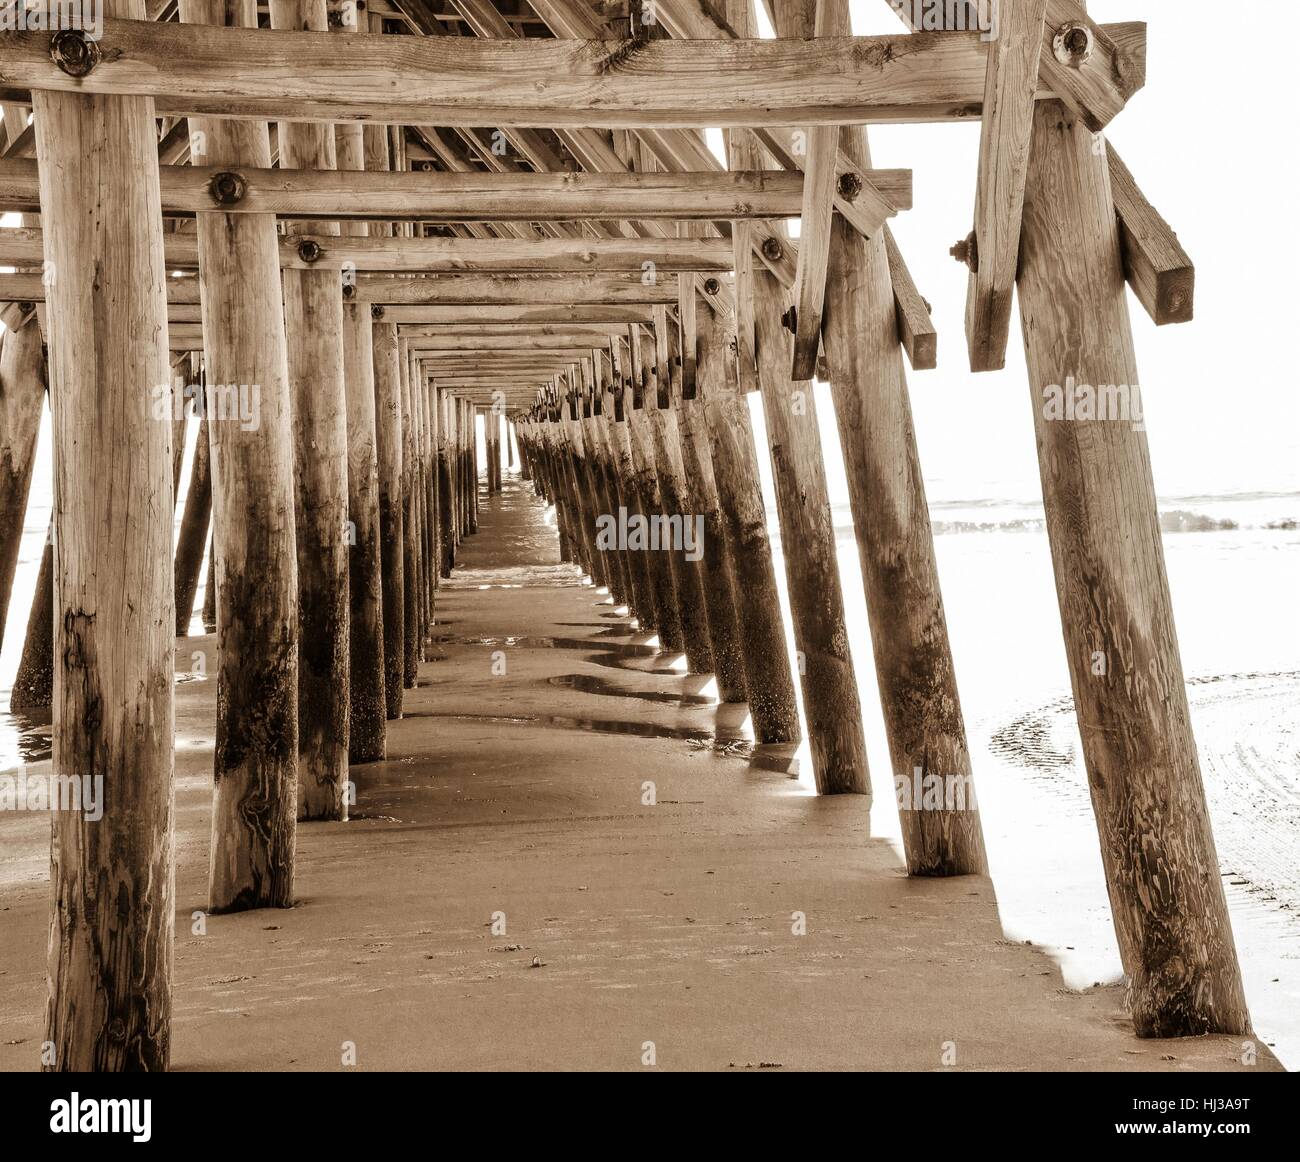 Coastal Living. Abstract view under long wooden pier with diminishing perspective along the Atlantic Ocean coast in Myrtle Beach, South Carolina, USA. Stock Photo